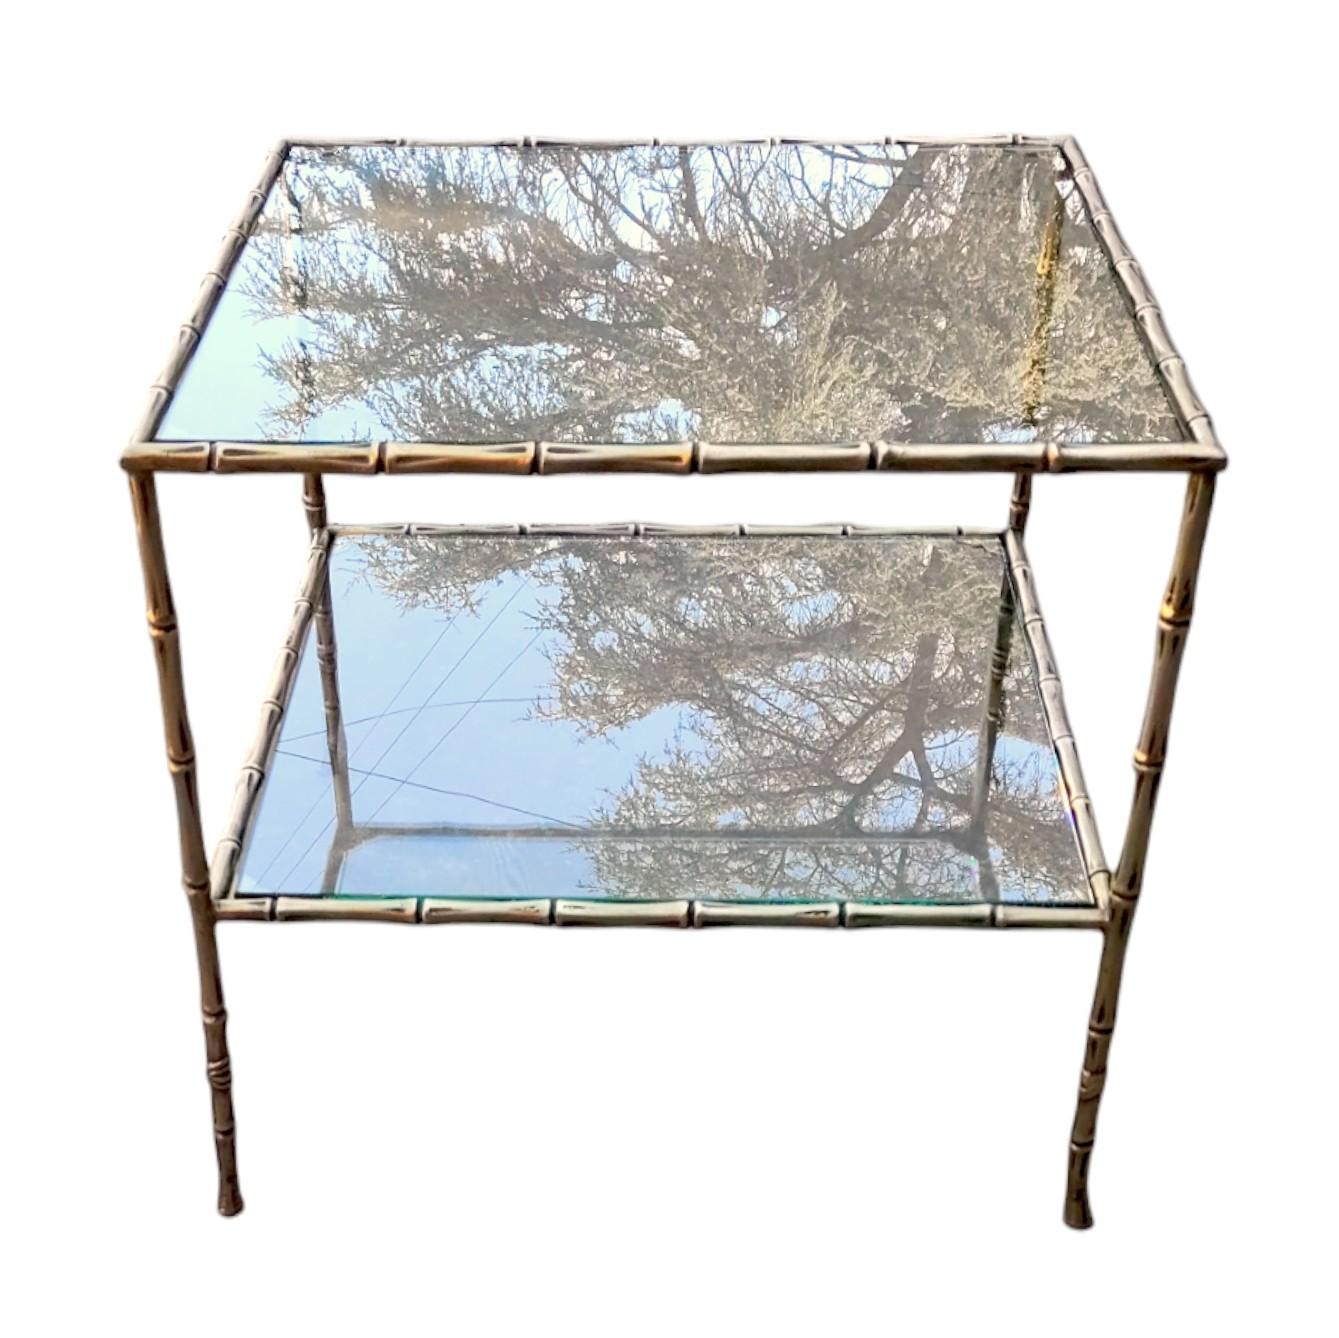 Art Deco Jansen Style Faux Bamboo Gilt Bronze Glass Top Coffee Cocktail Table For Sale